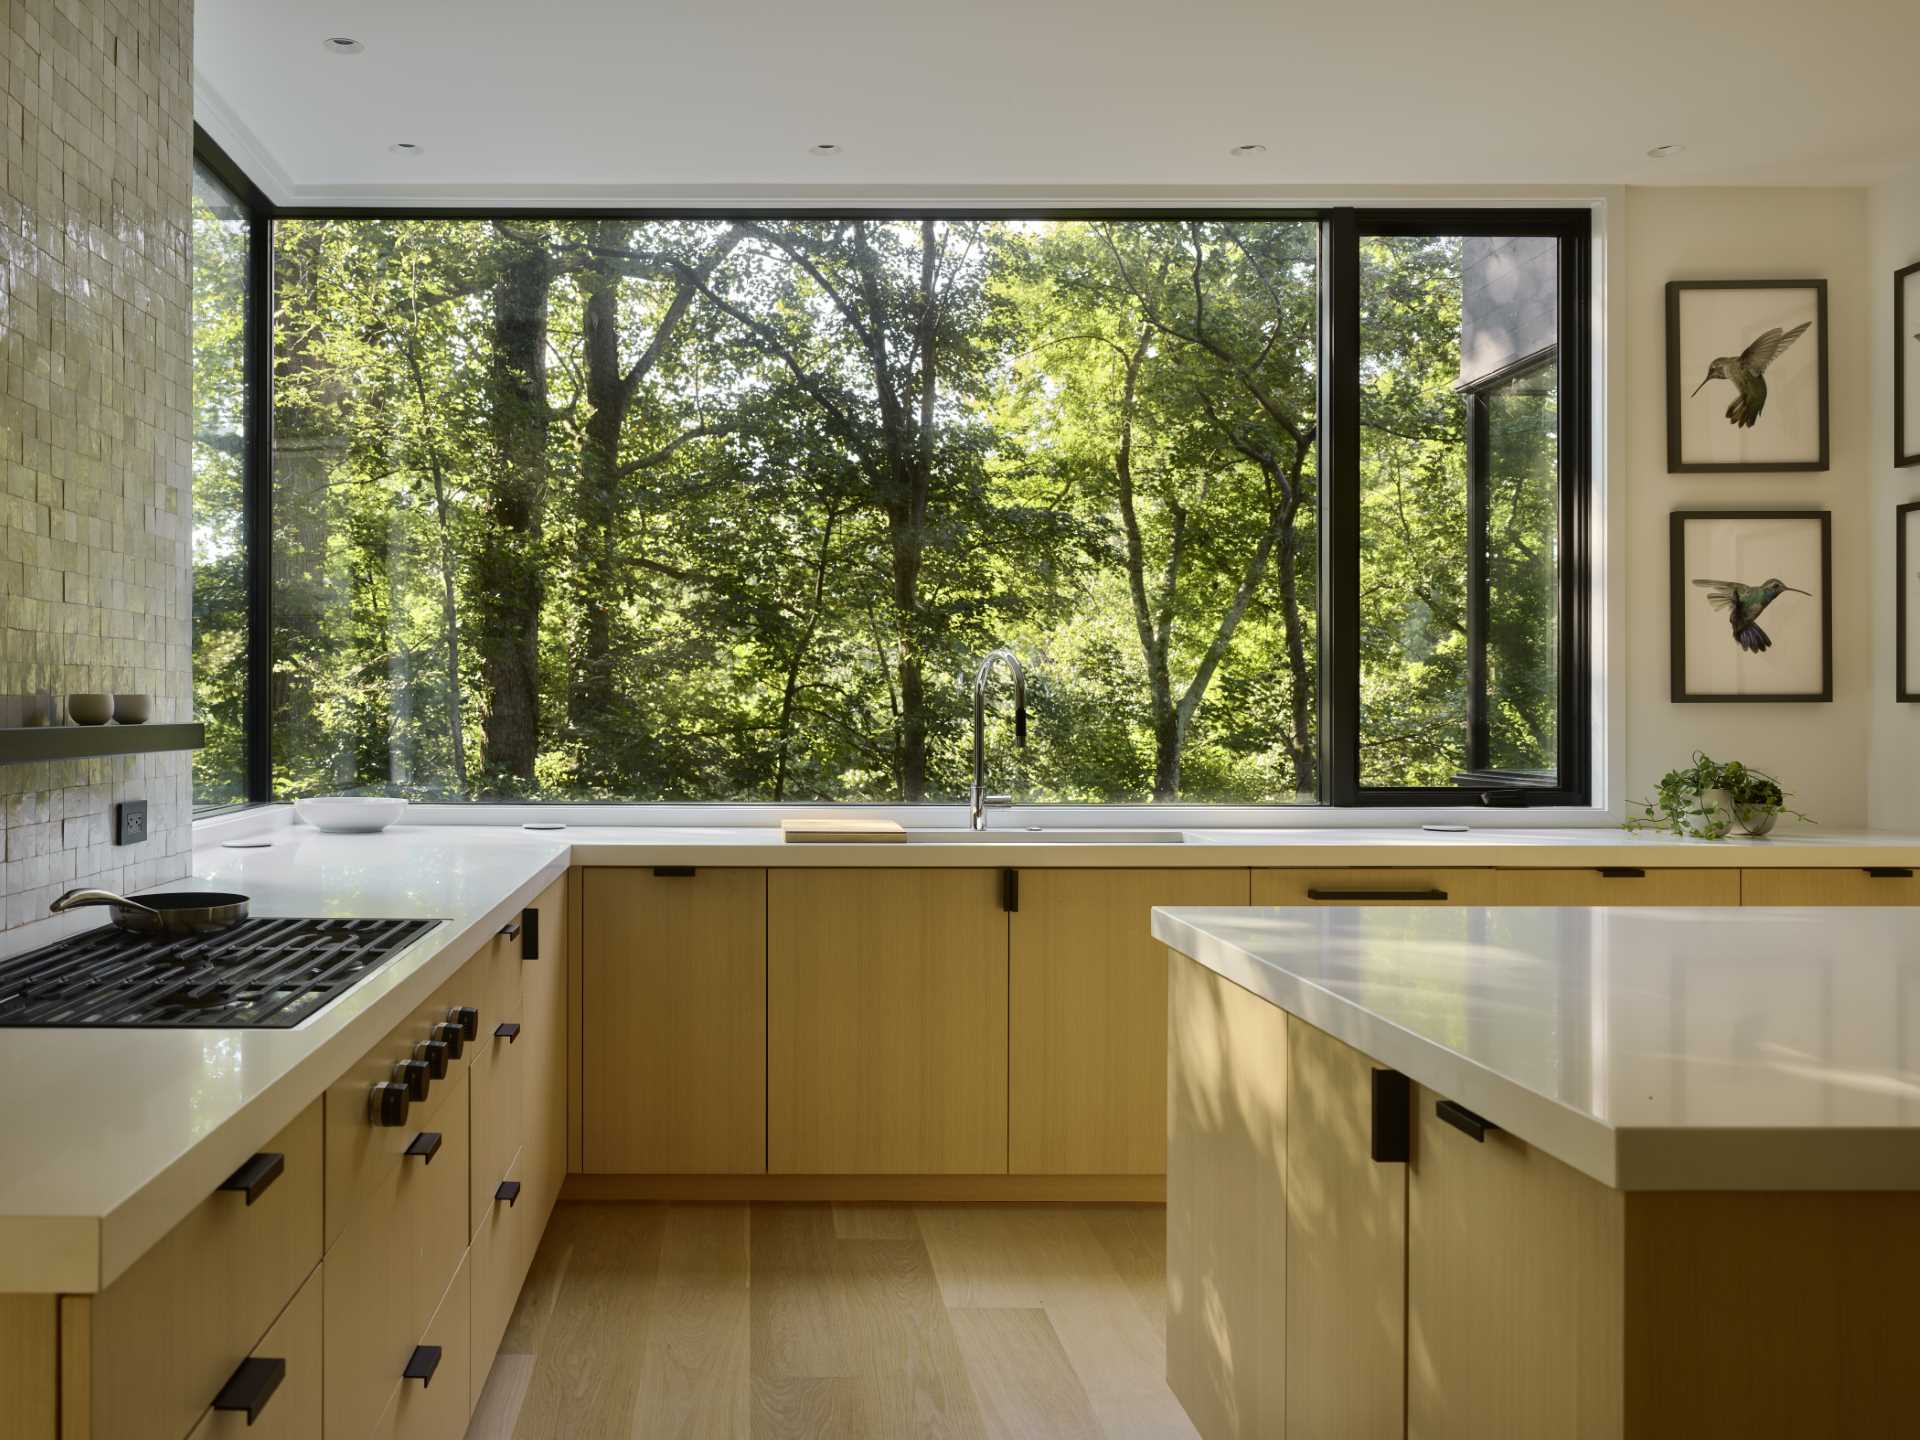 In this modern kitchen, the cabinets have been designed in such a way as to allow the tree views to be enjoyed.